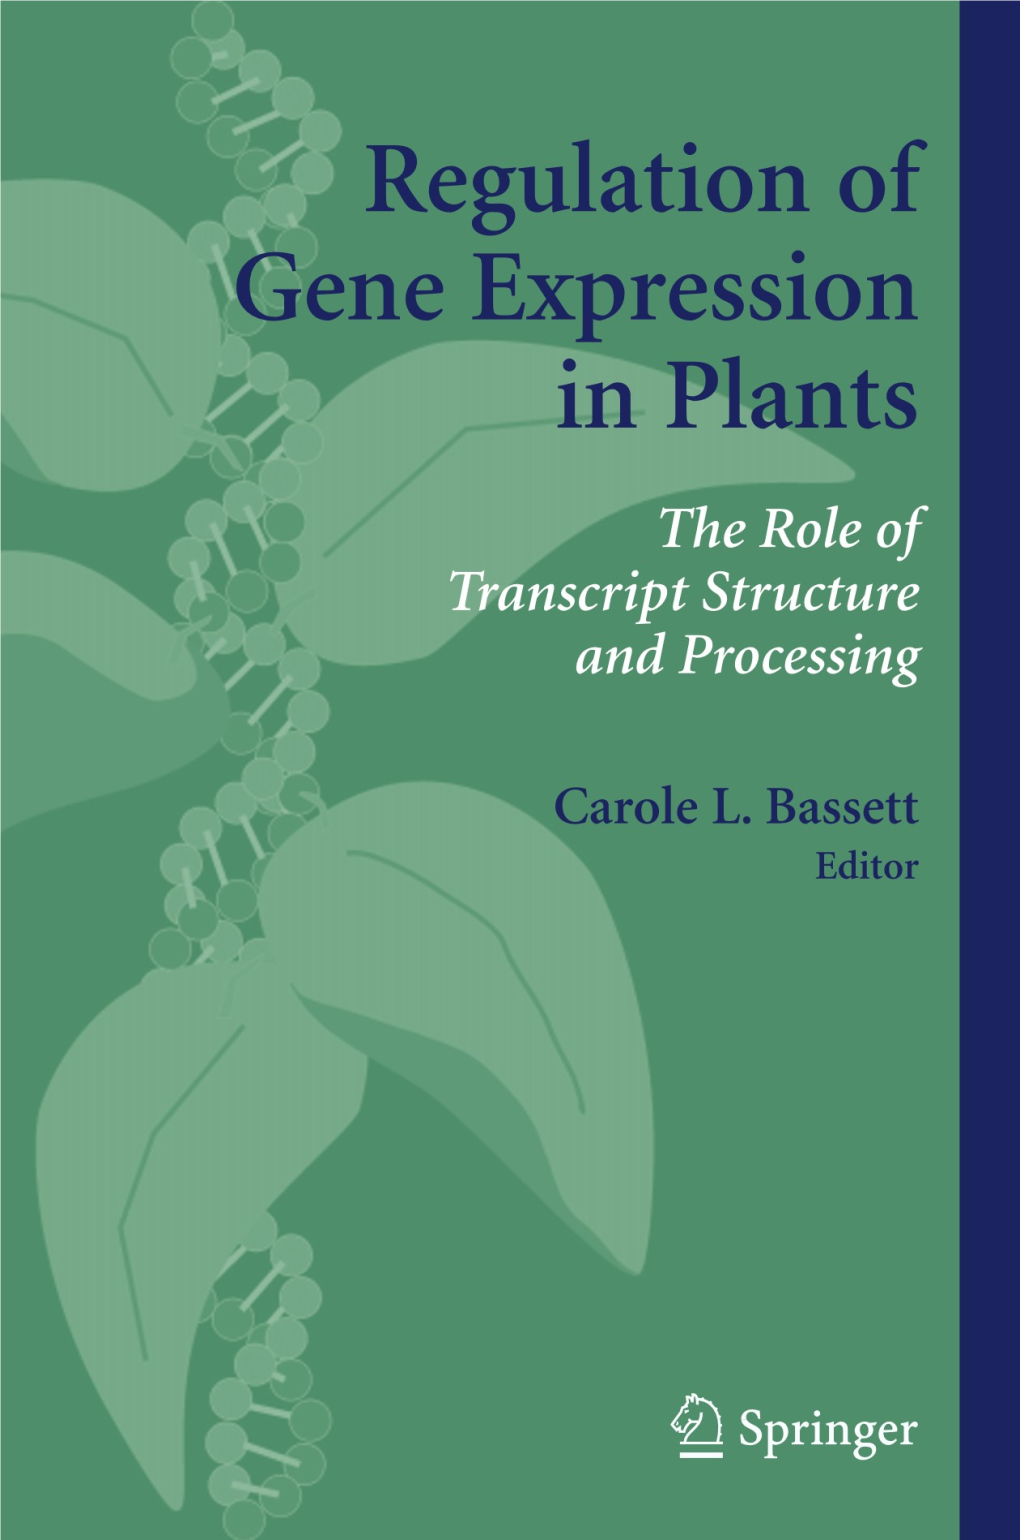 Regulation of Gene Expression in Plants FM.Qxd 29/01/07 12:08 PM Page Iii